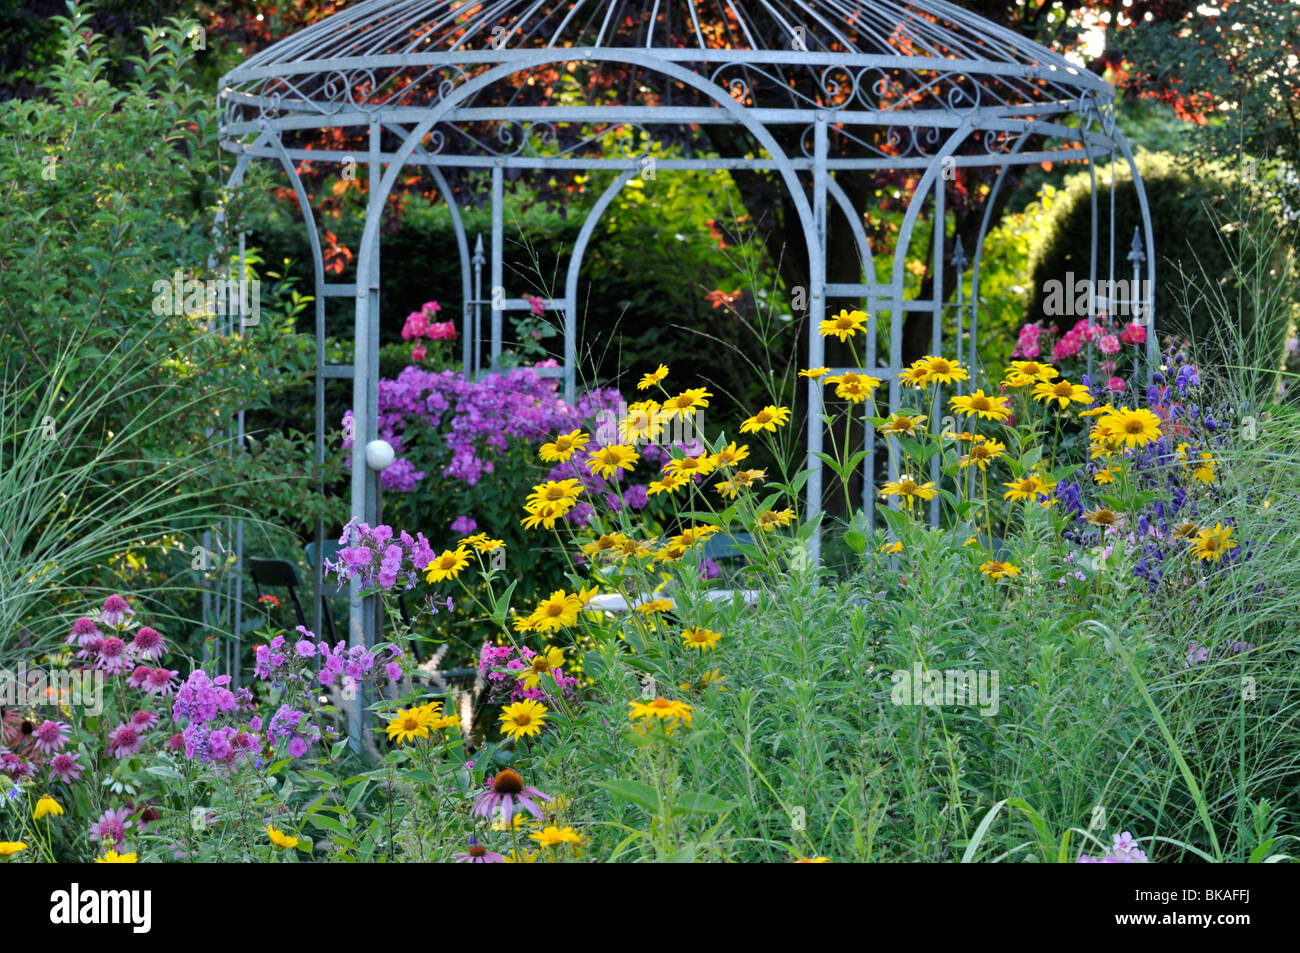 Garden phlox (Phlox paniculata) and false sunflower (Heliopsis helianthoides) in front of a garden pavilion. Design: Marianne and Detlef Lüdke Stock Photo